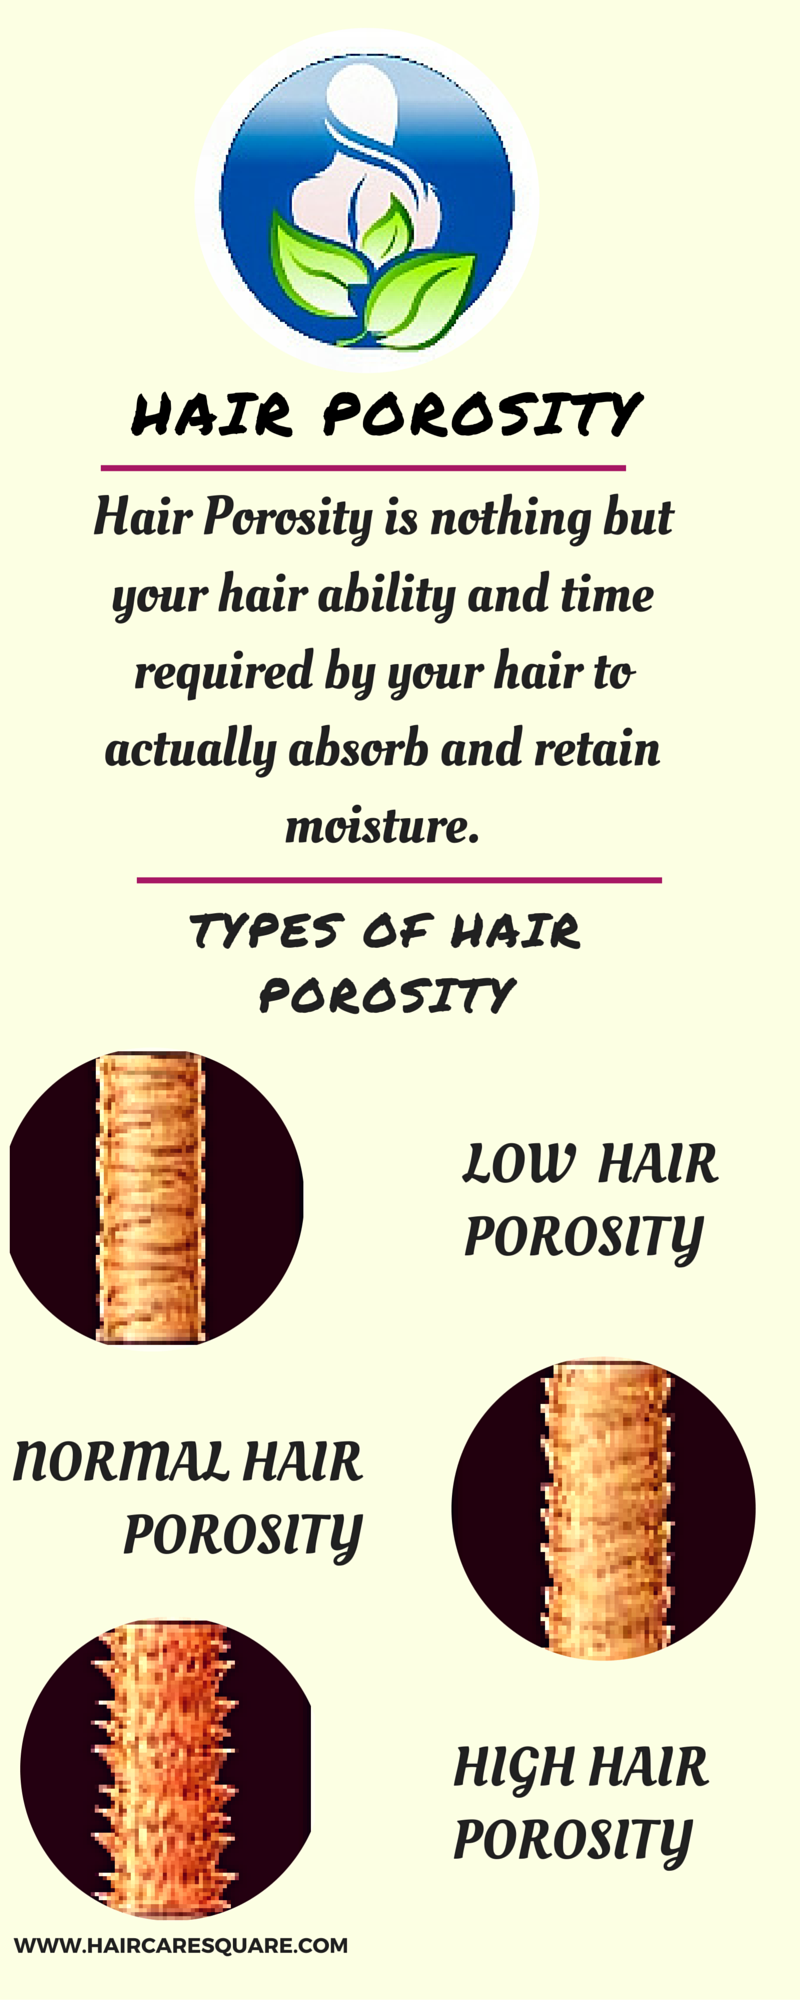 Hair Porosity and its types